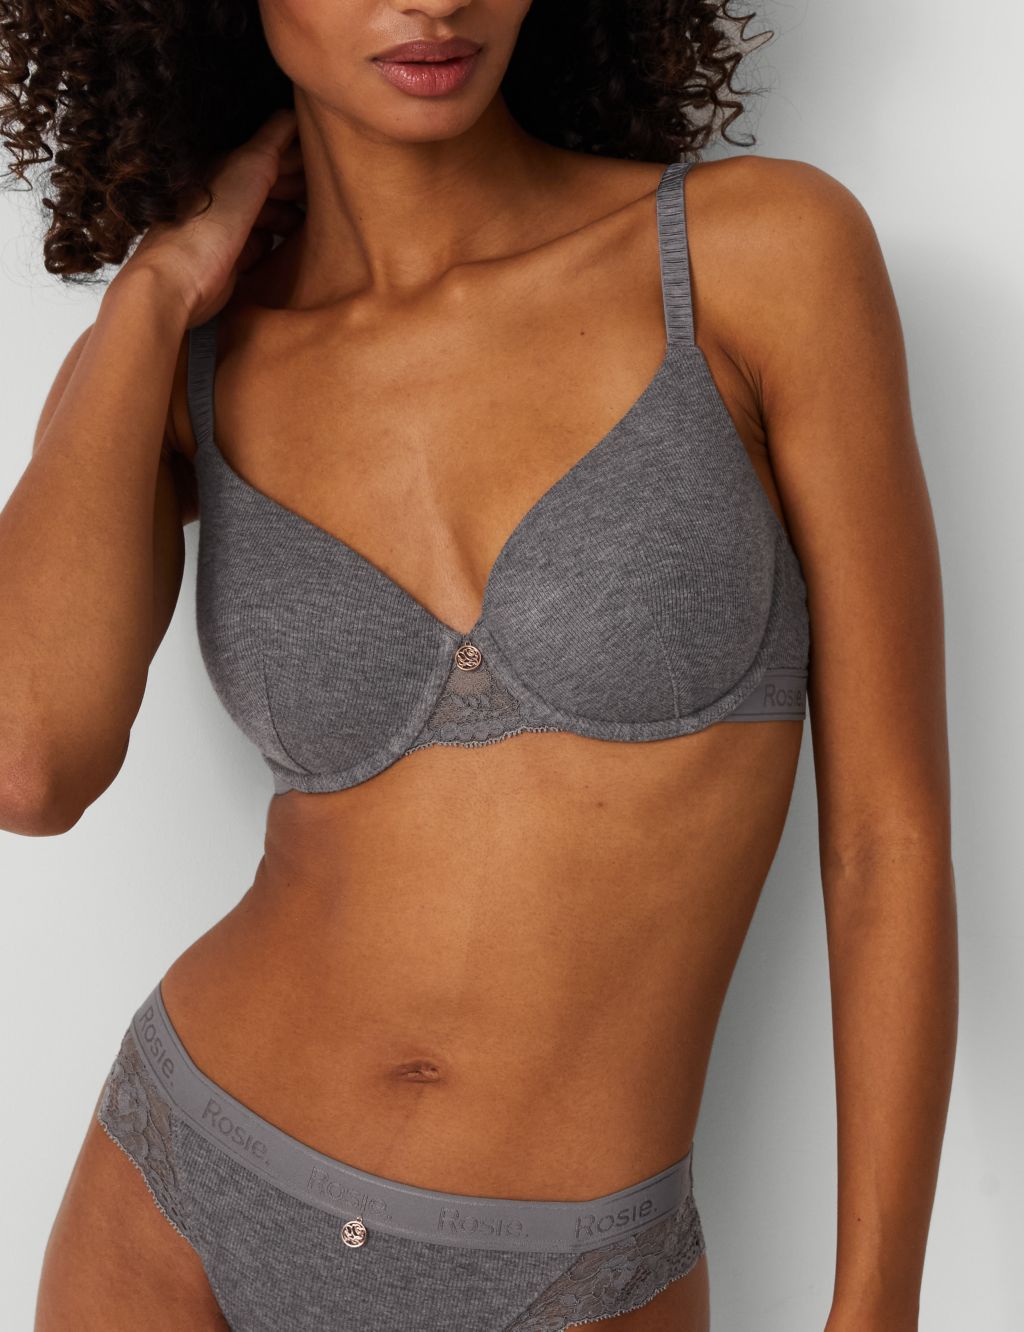 M&S Grey Mix Underwired Full Cup Bra Size 42A BNWT